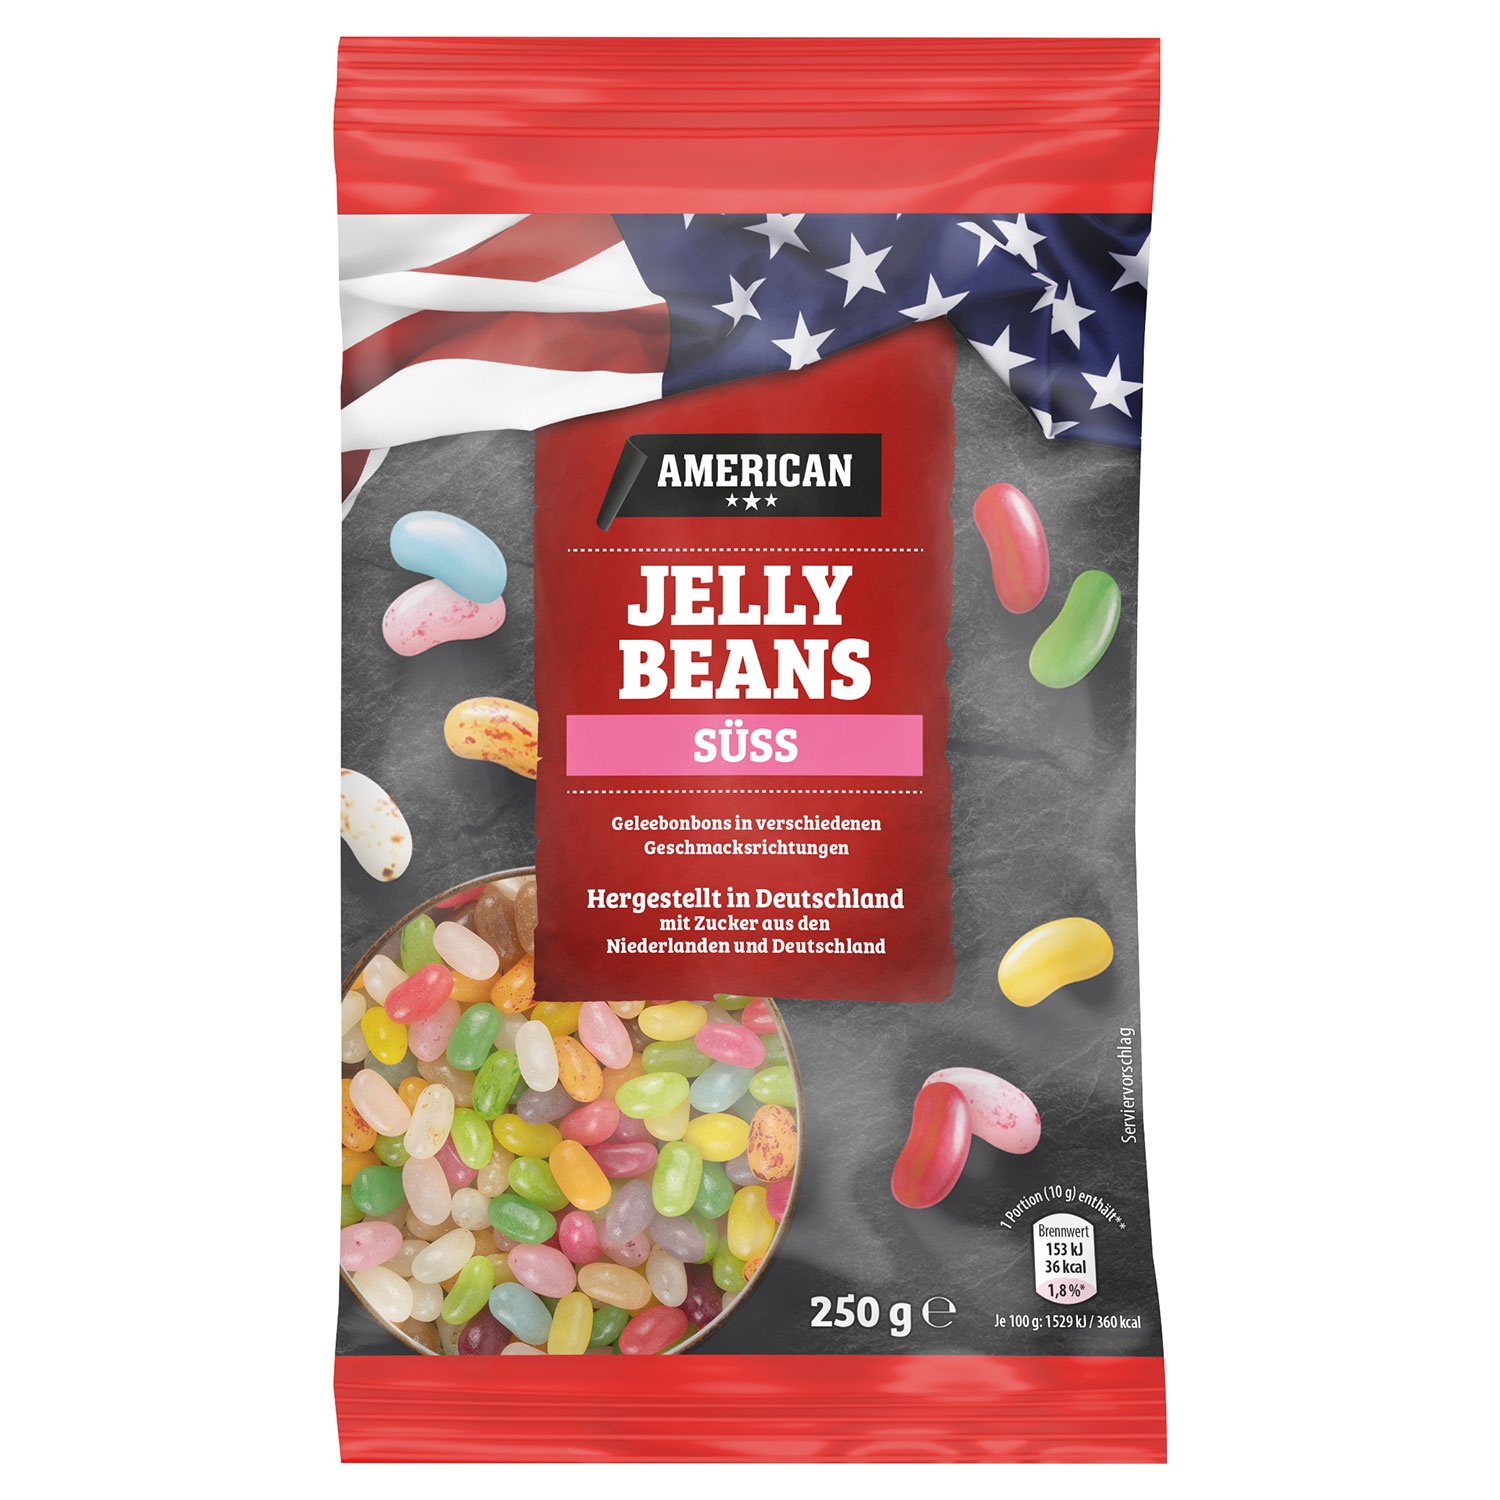 AMERICAN Jelly Beans 250 g